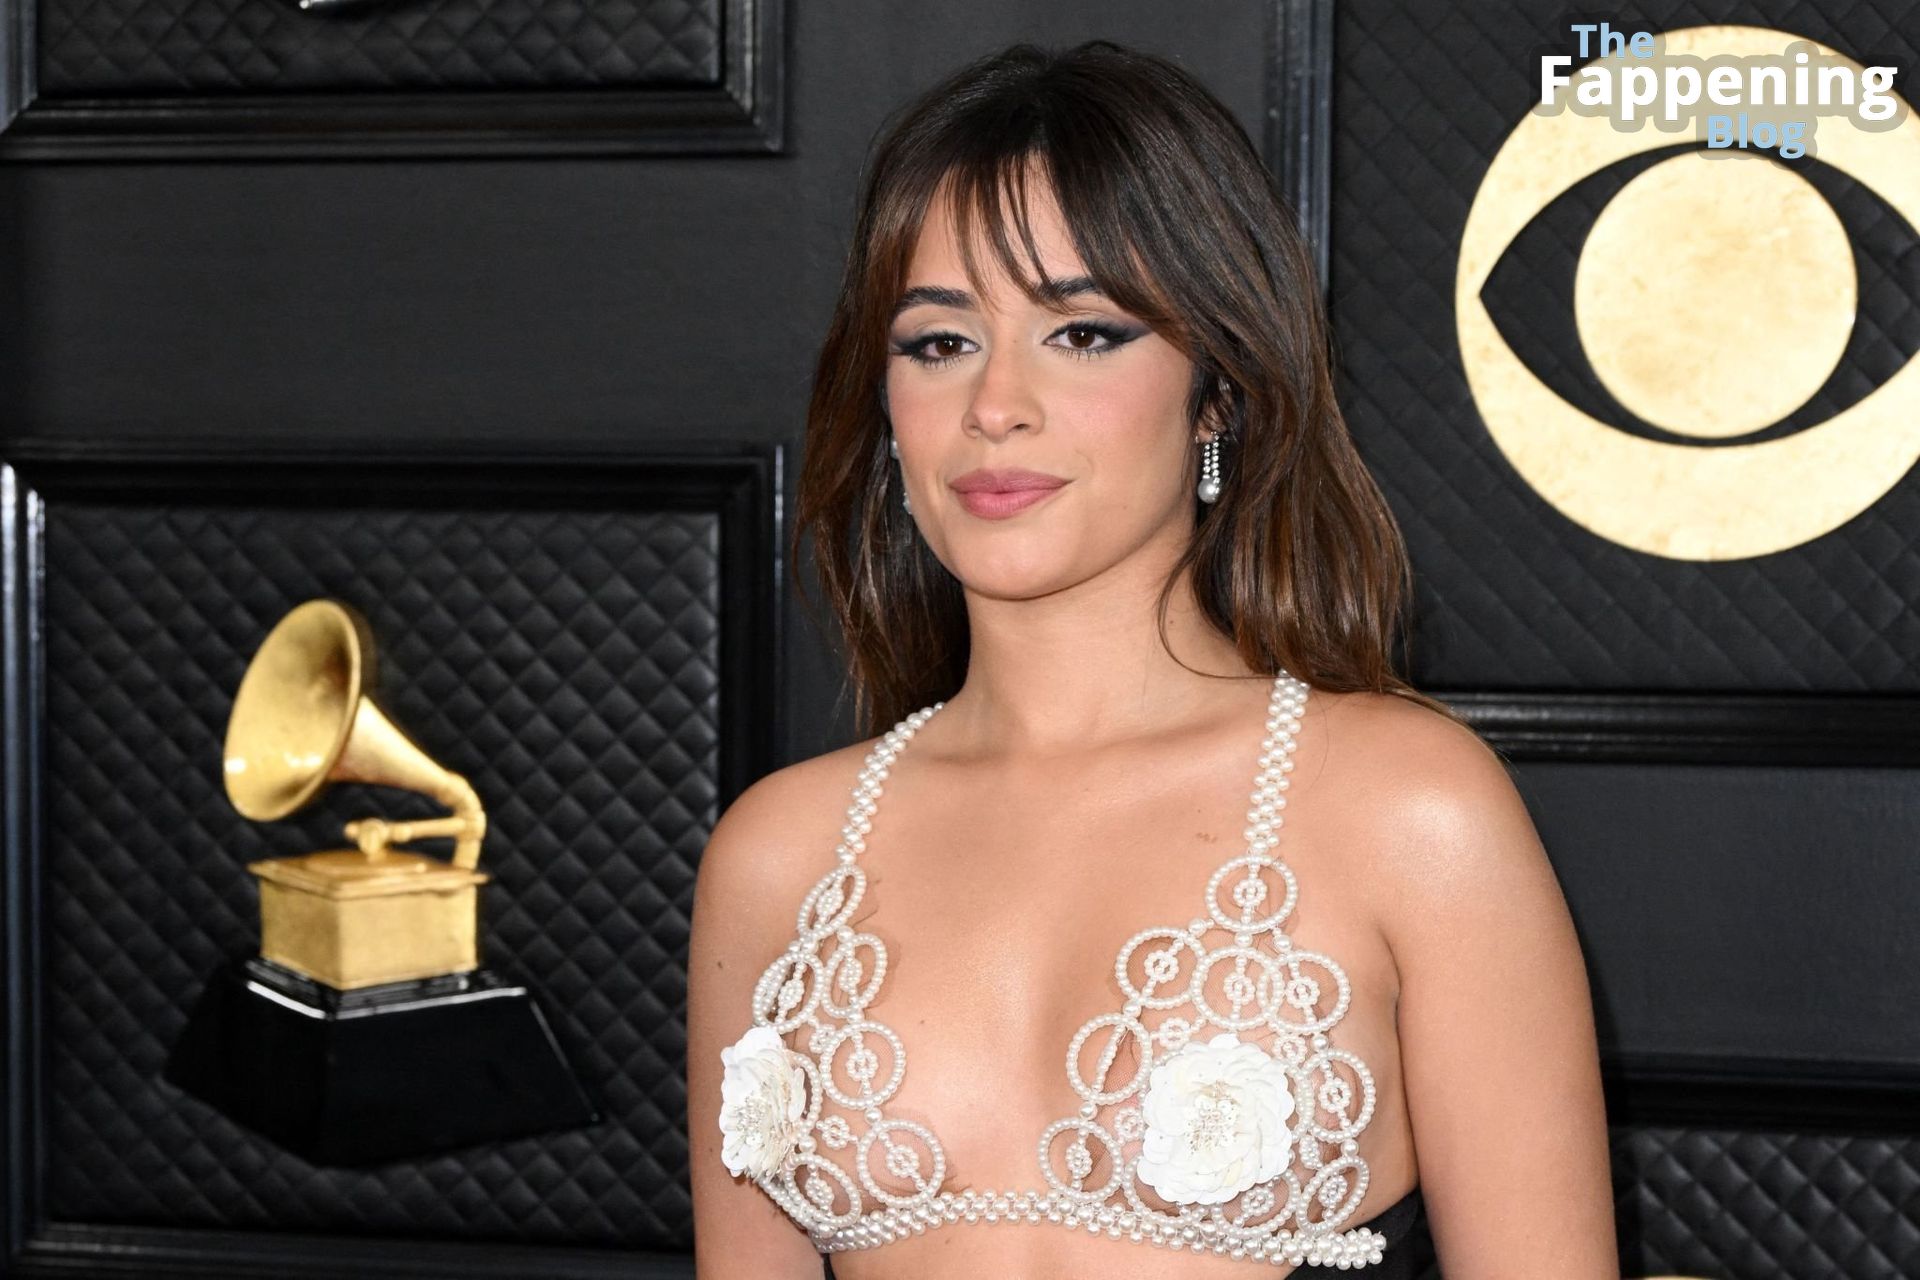 Camila-Cabello-Sexy-Tits-The-Fappening-Blog-70.jpg